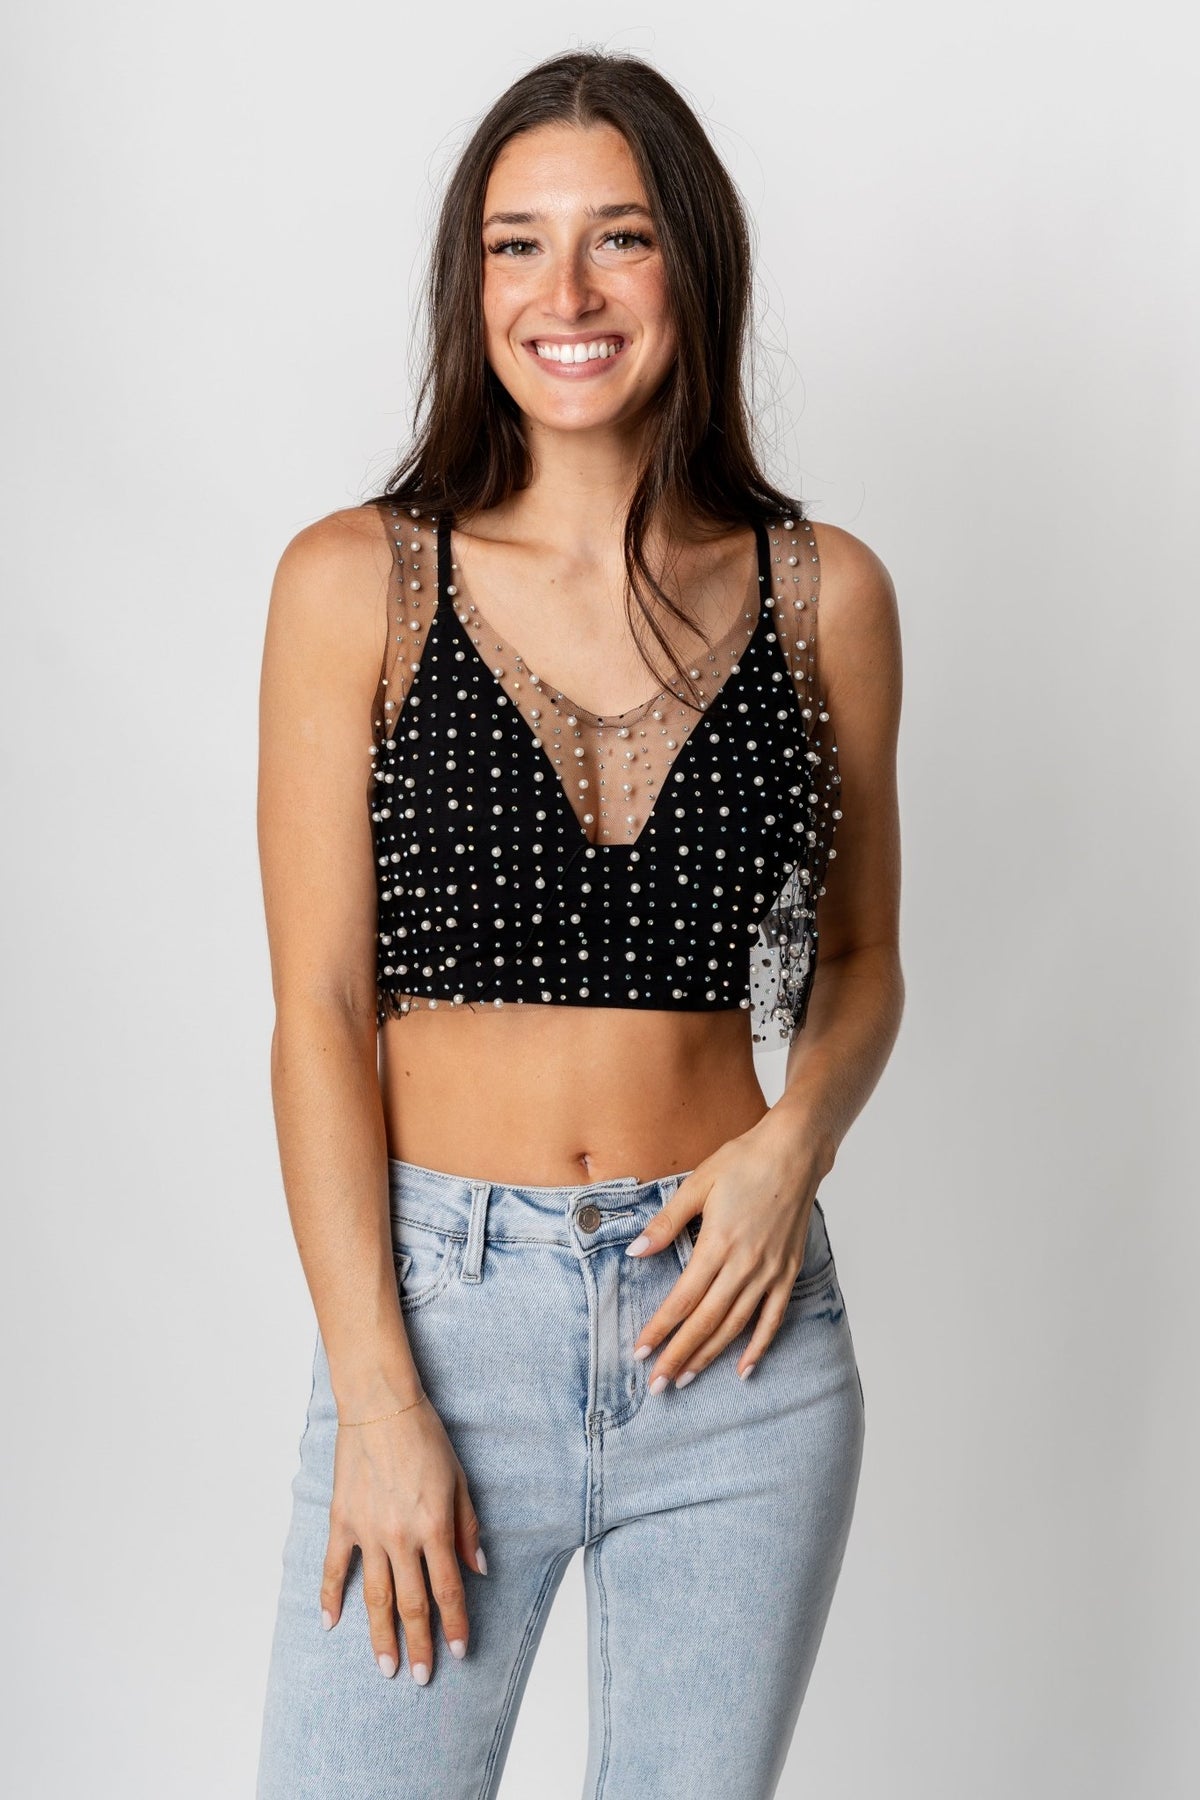 Pearl studded mesh tank top black - Cute Tank Top - Trendy Tank Tops at Lush Fashion Lounge Boutique in Oklahoma City